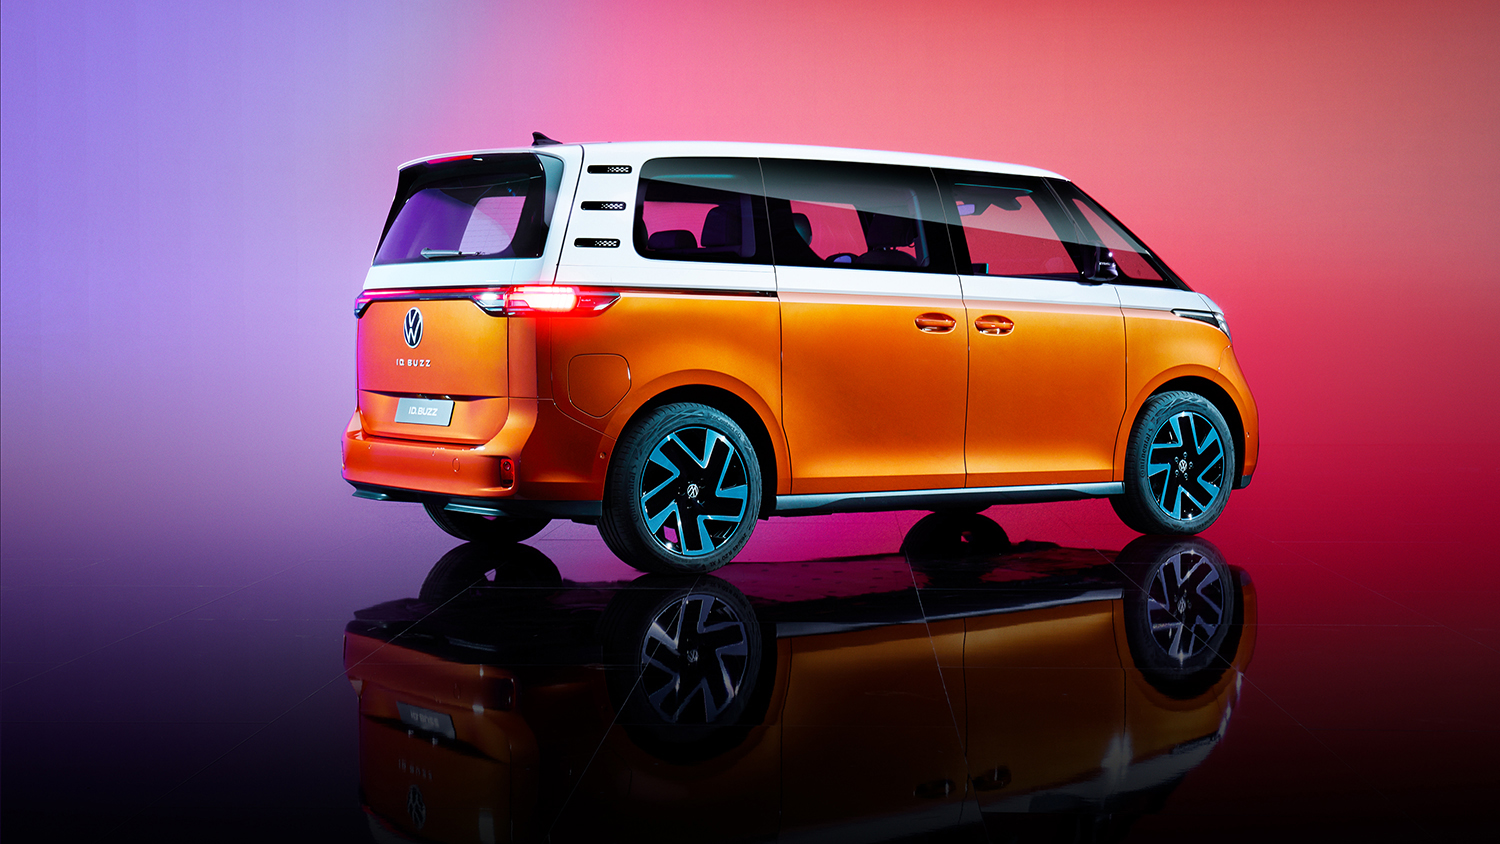 top gear’s top 9: minivans that are cooler than suvs